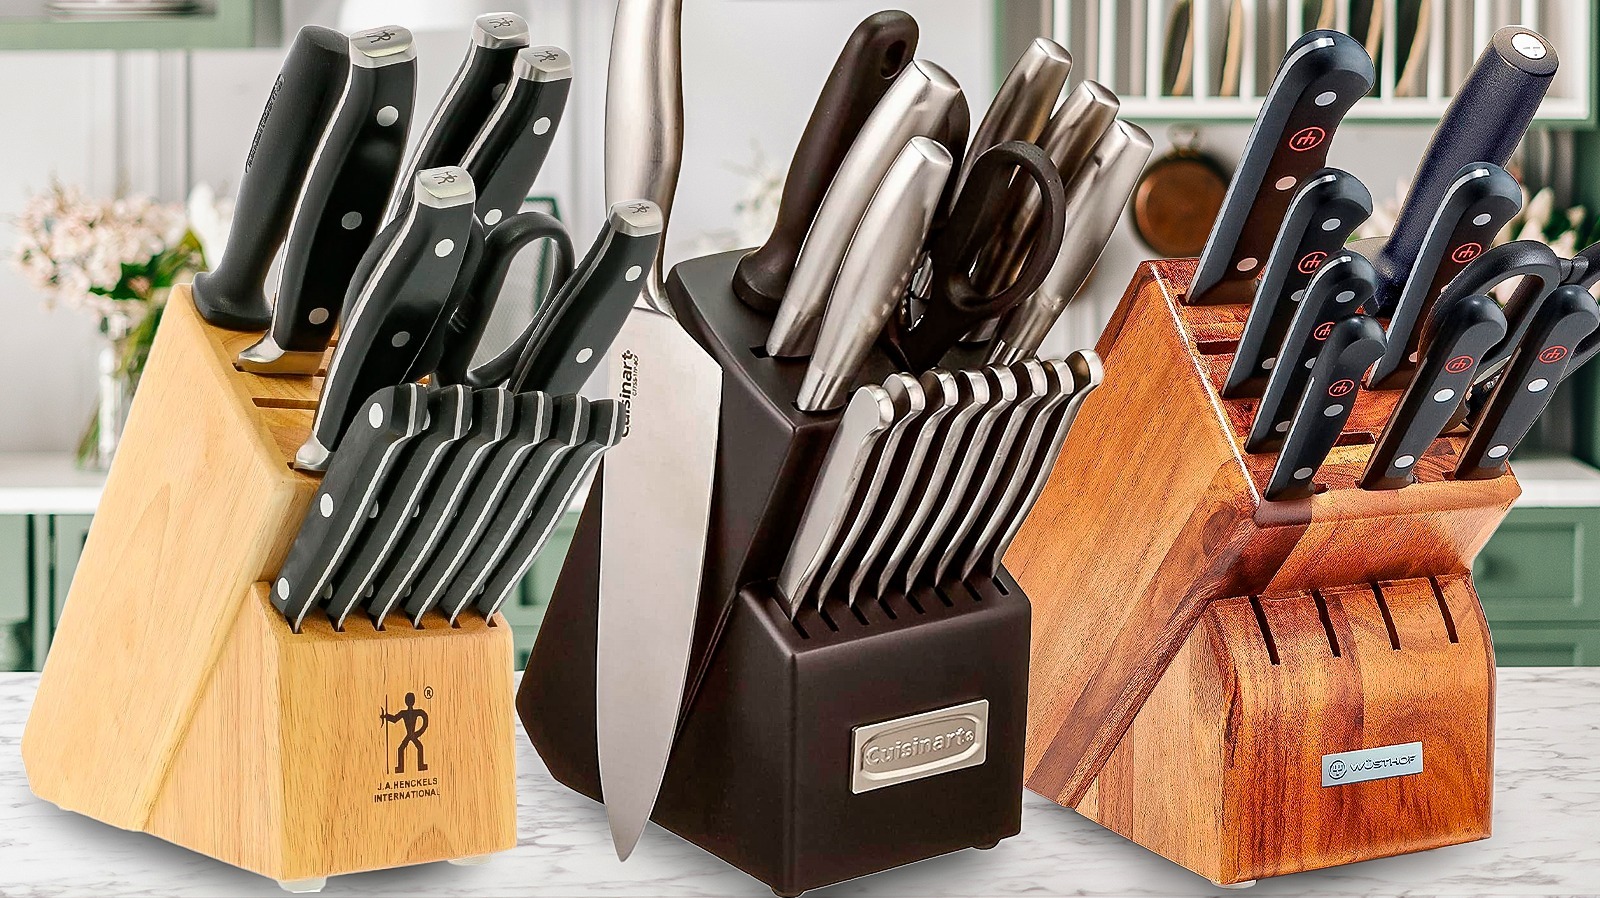 https://www.tastingtable.com/img/gallery/the-8-best-kitchen-knife-sets-youll-want-to-keep-on-your-counter/l-intro-1695070408.jpg